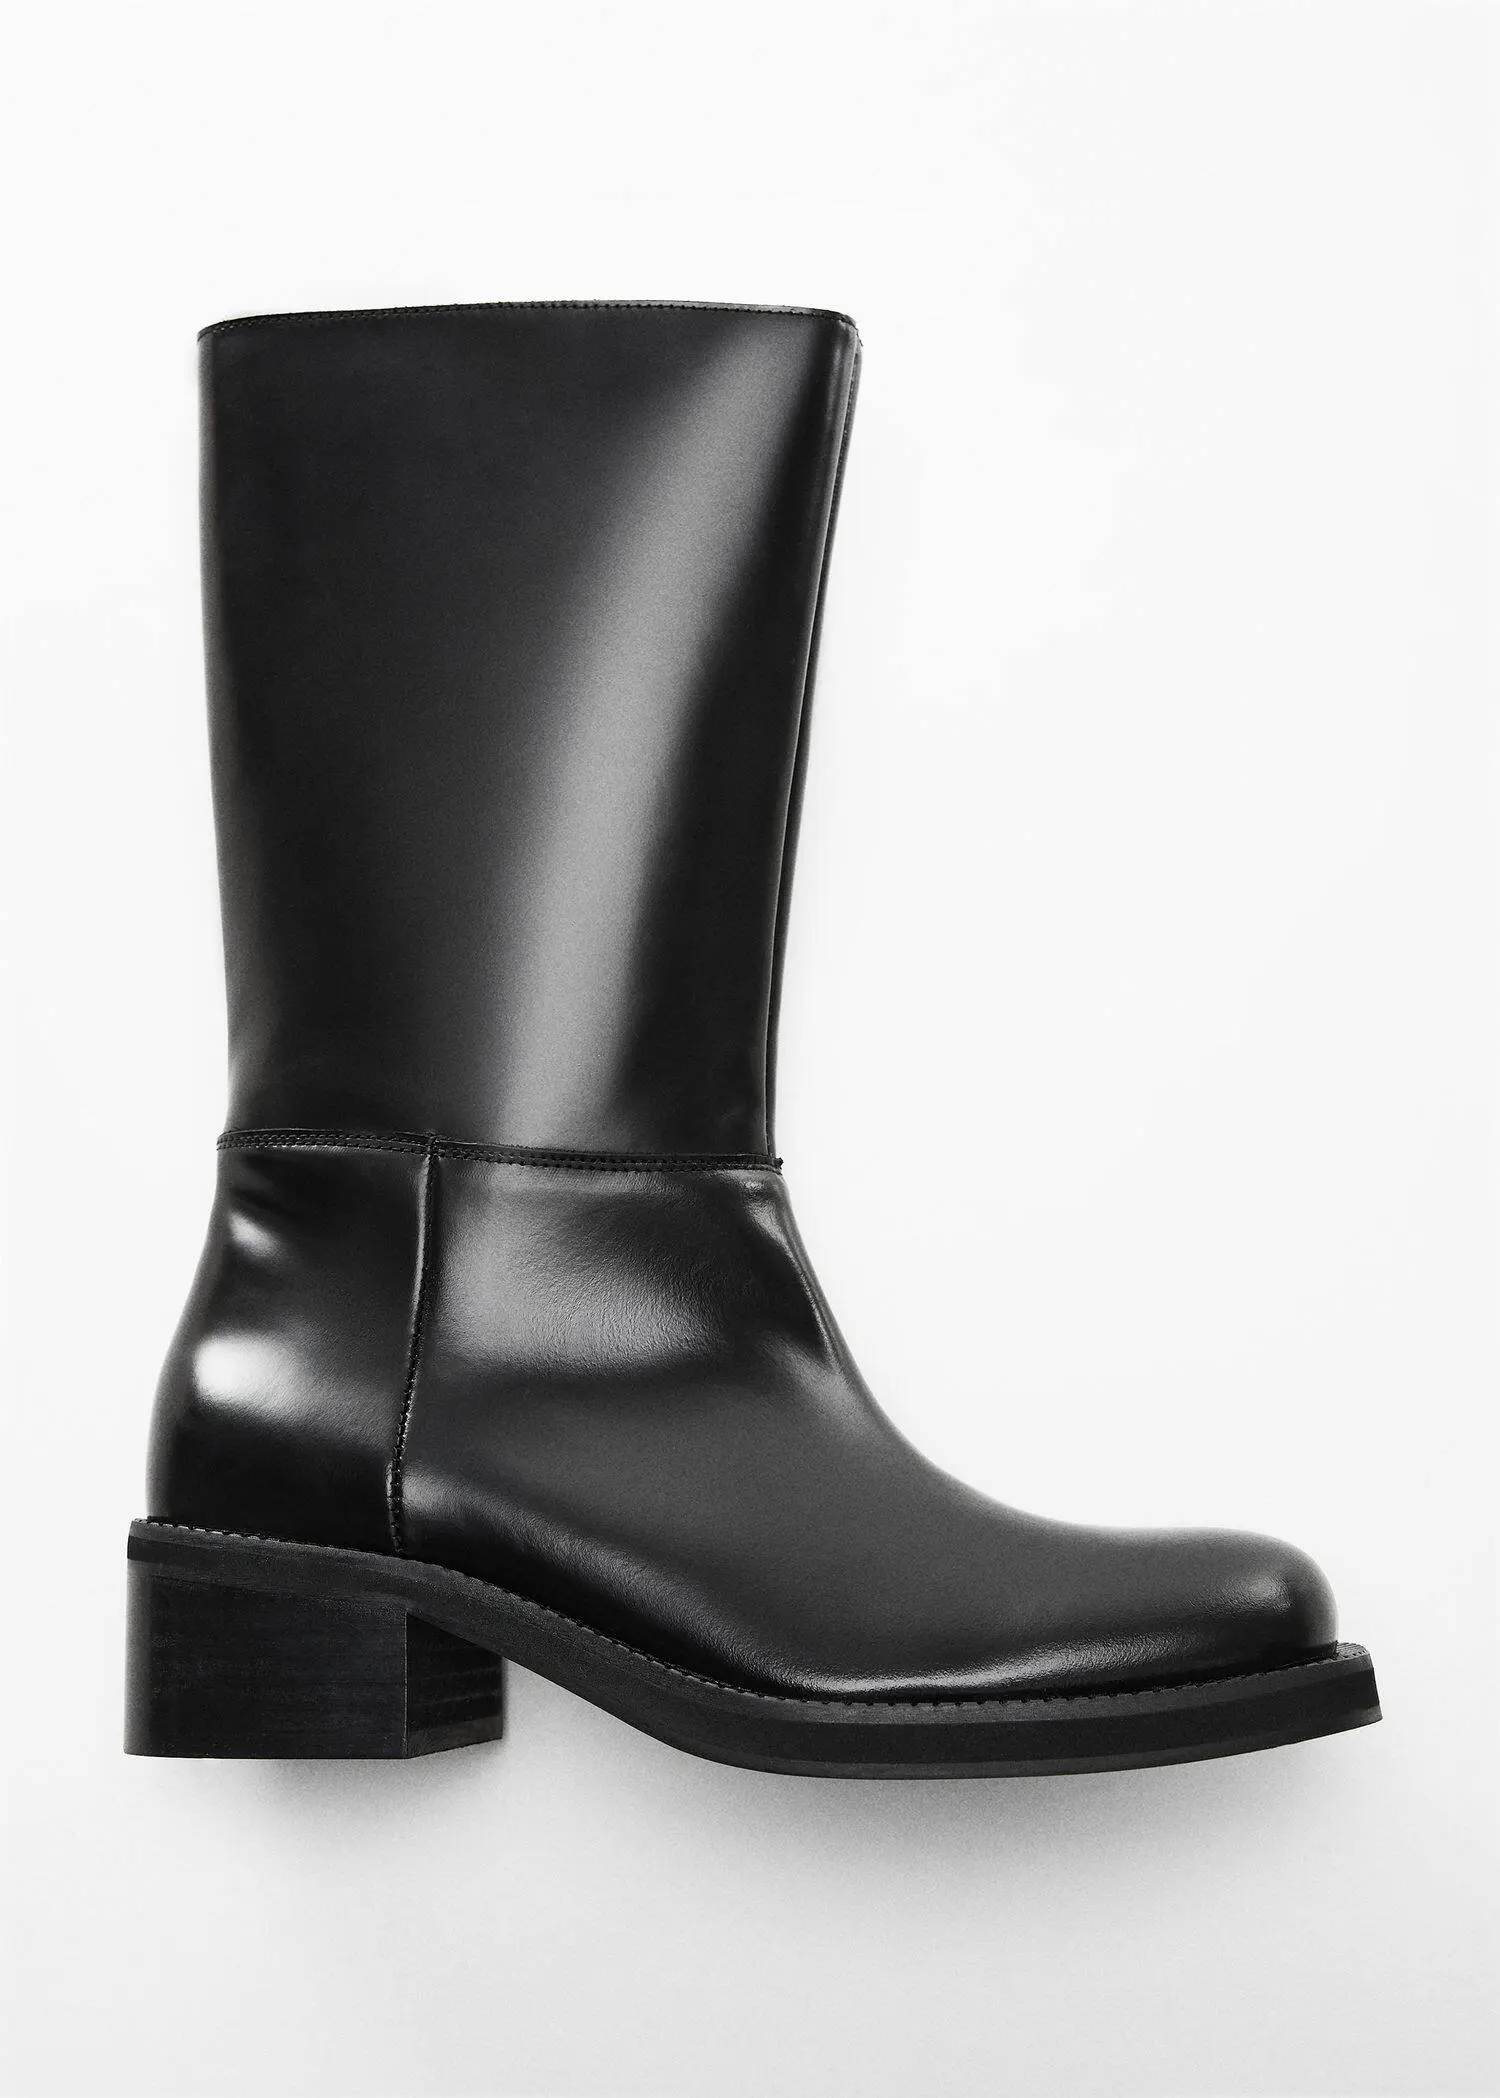 Mango Leather boots with zip closure. 1